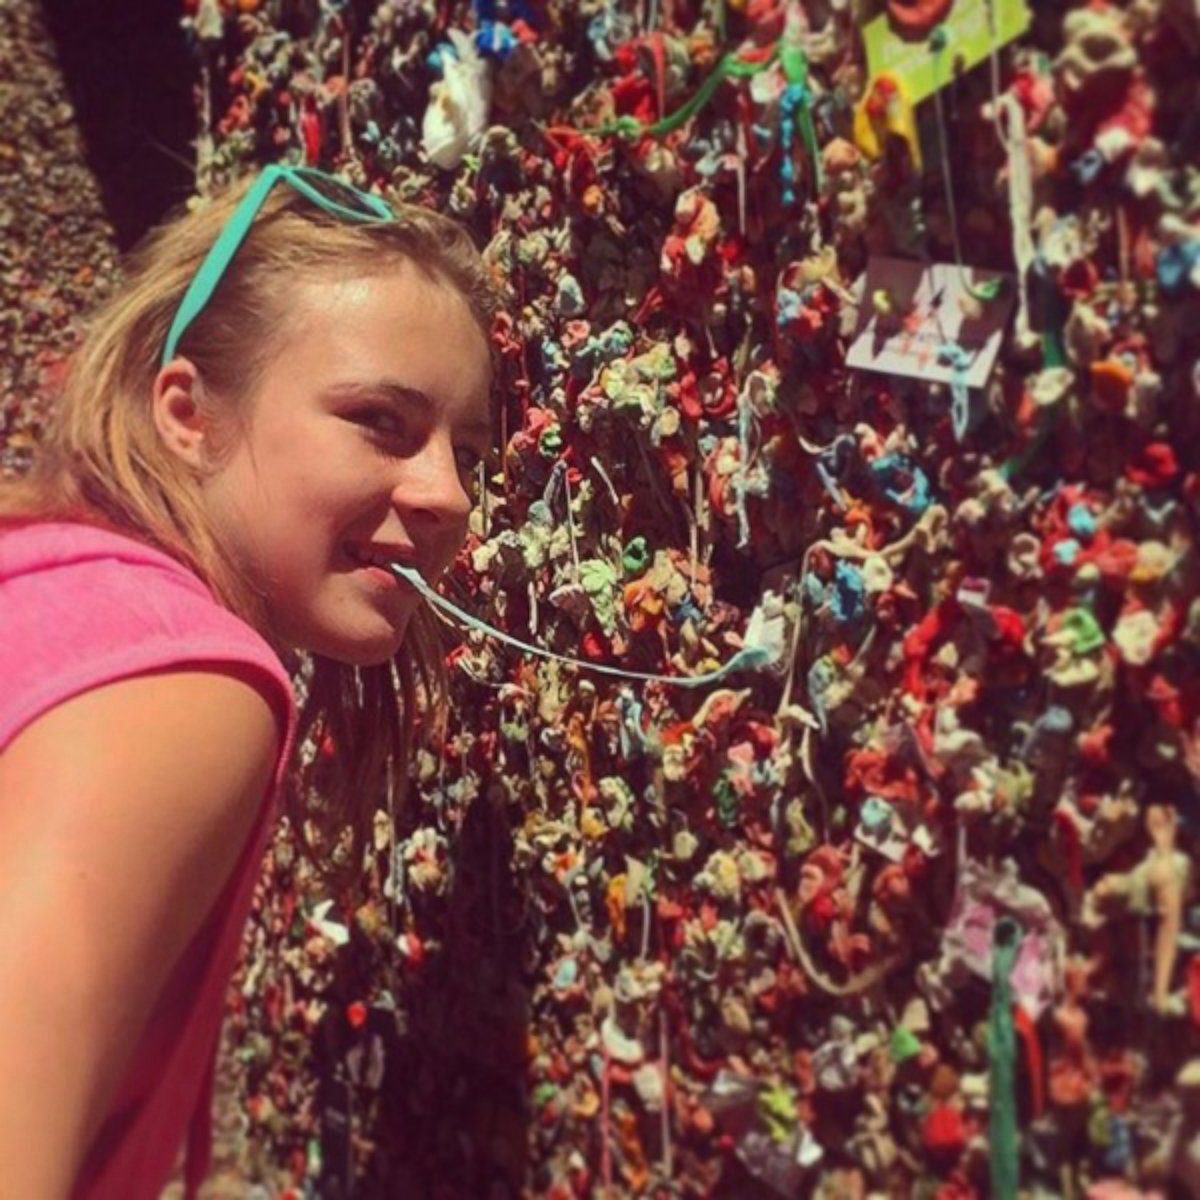 PHOTO: Brynn Sas took a photo of her daughter Satine while visiting the Gum Wall.
Credit: Brynn Sas